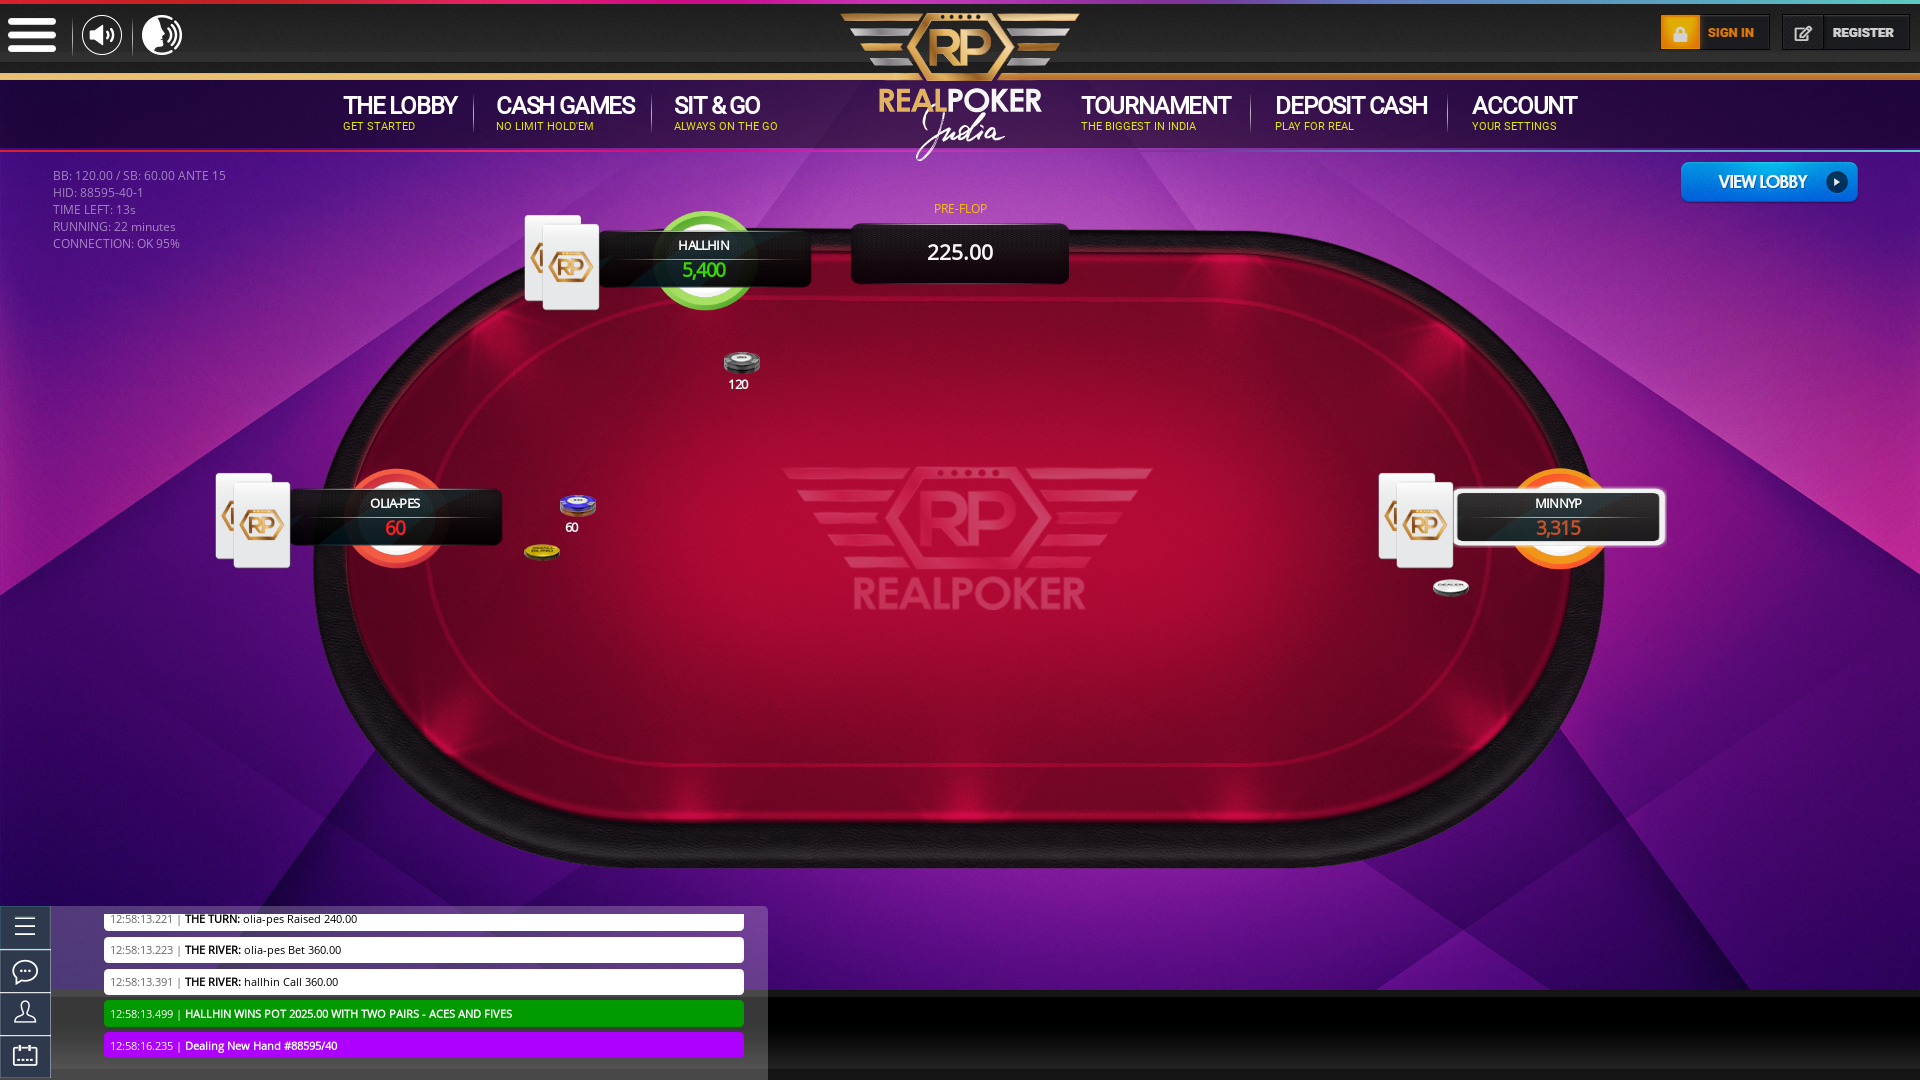 Indian poker on a 6 player table in the 22nd minute